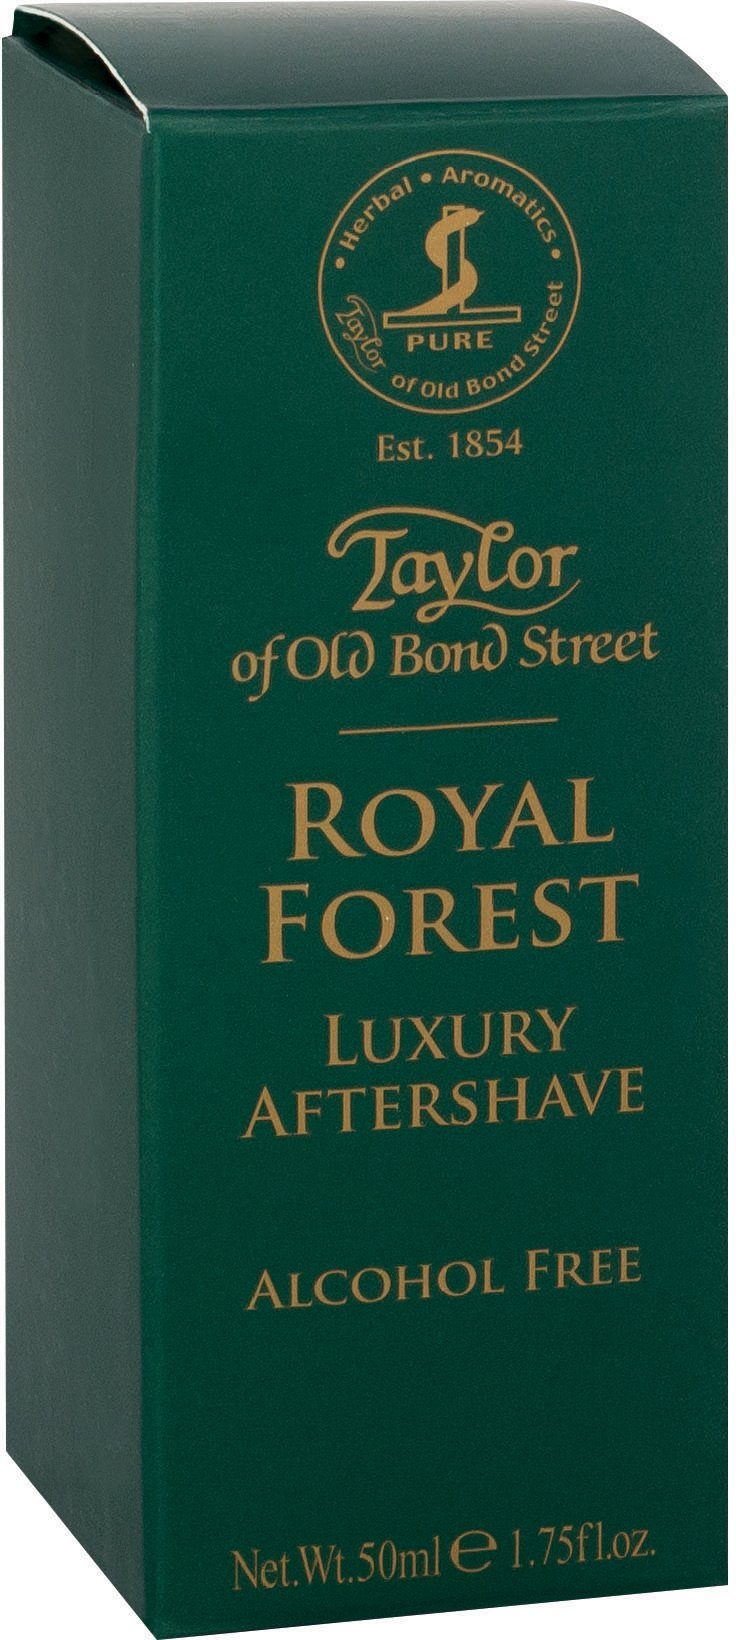 Taylor of Old Bond Street Royal After-Shave Luxury Forest Aftershave